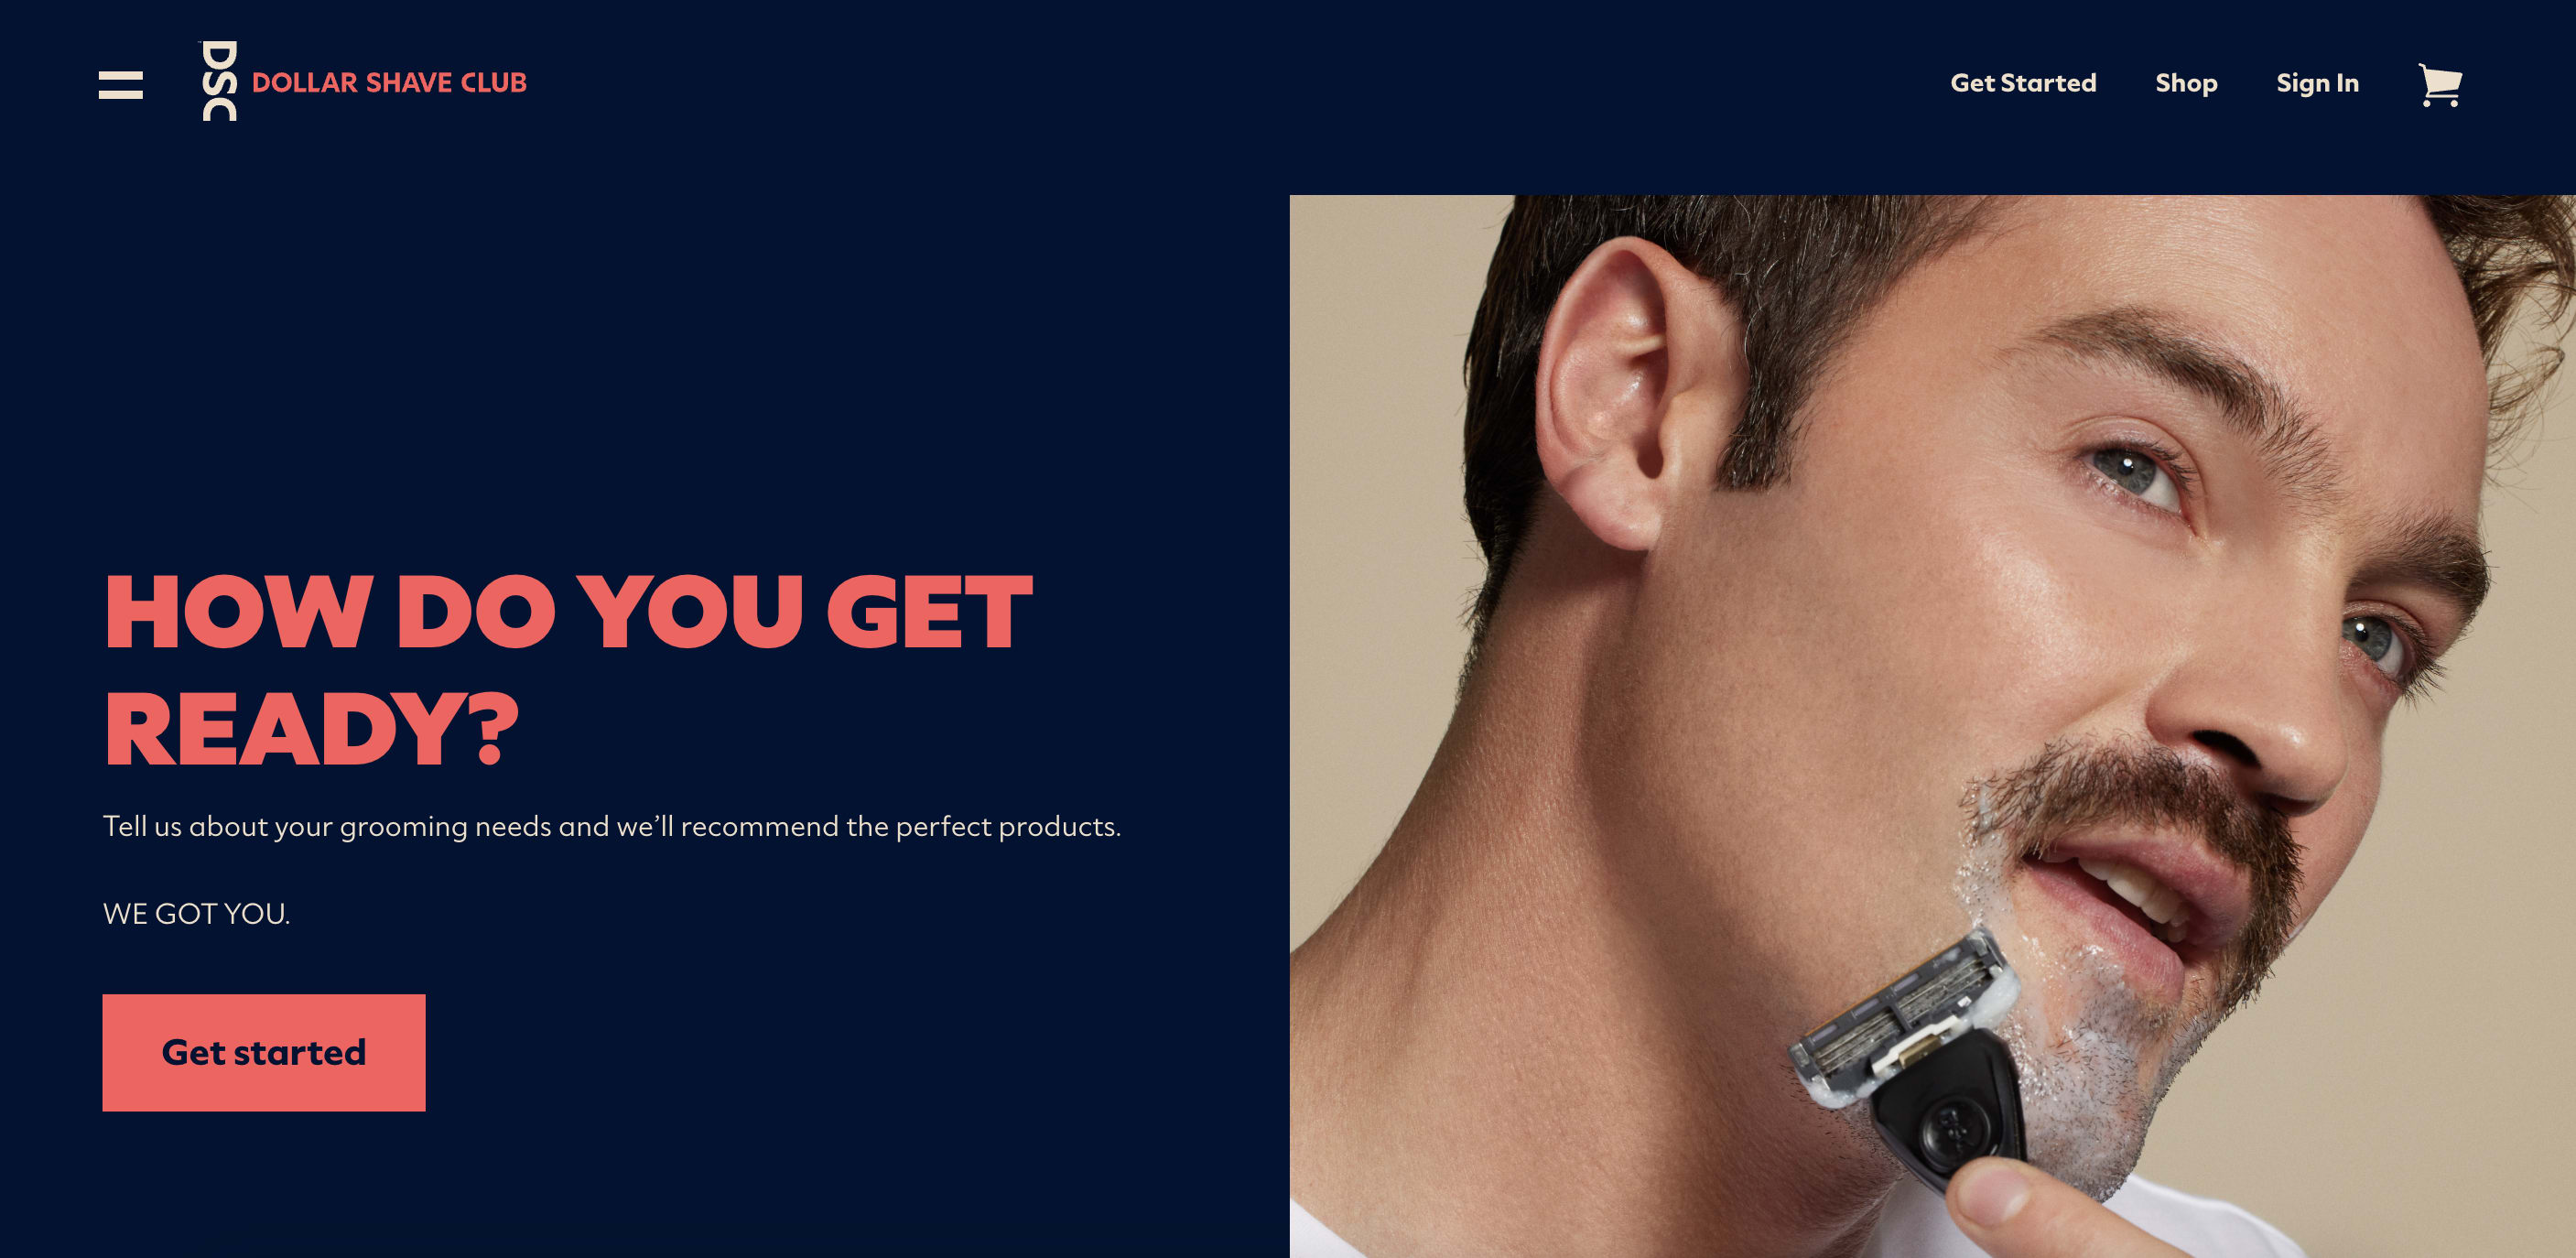 Dollar Shave Club, a subscription box service homepage